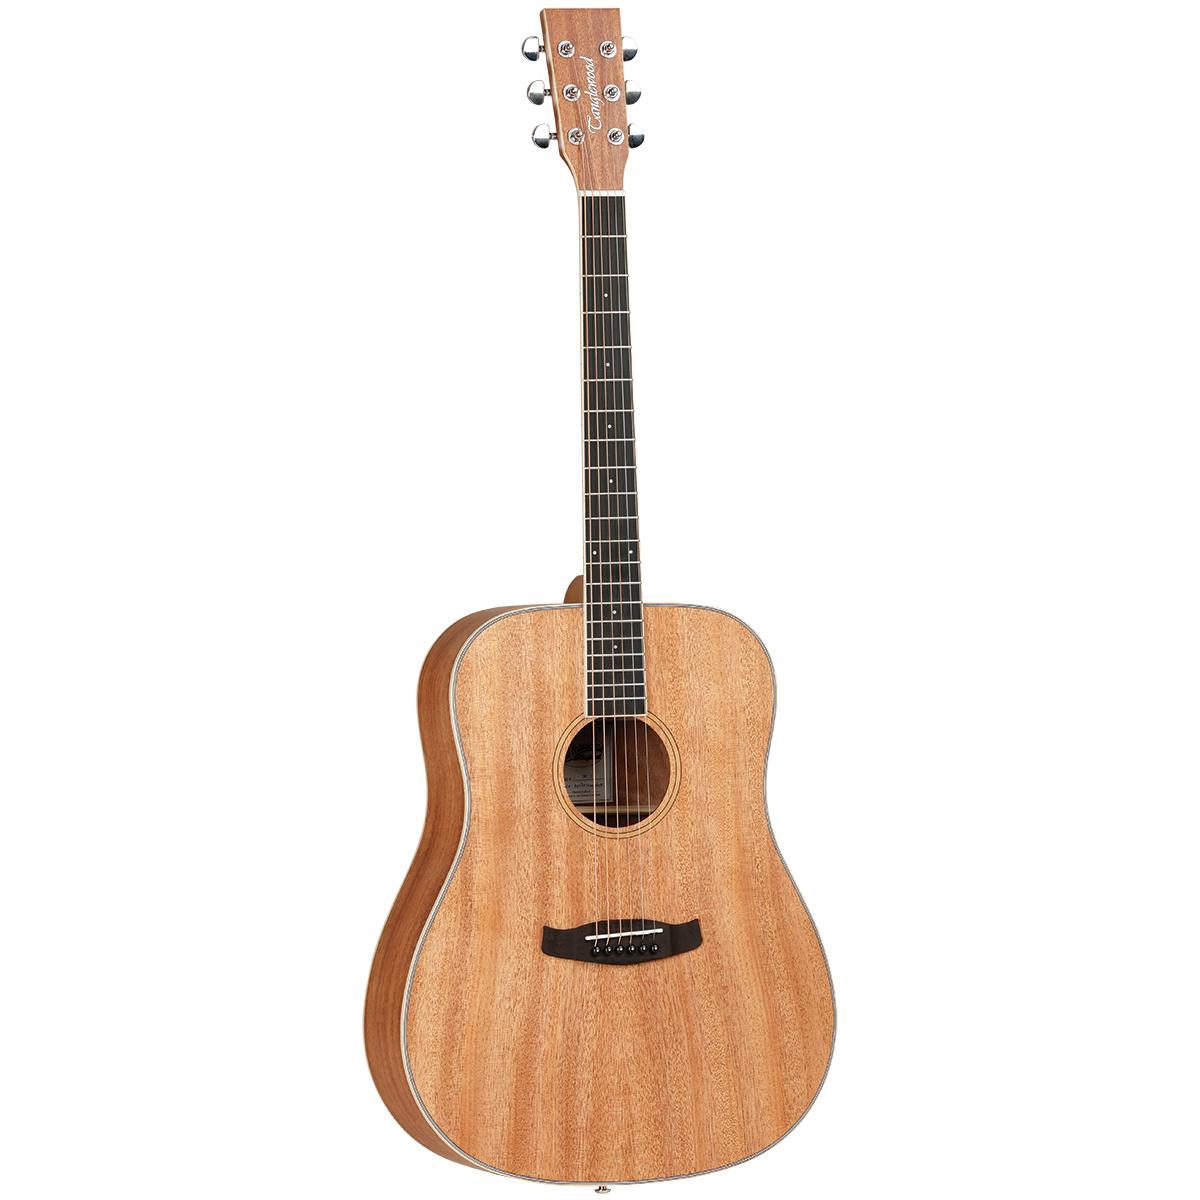 Tanglewood Union Dreadnought Solid Top Acoustic Guitar Natural Satin